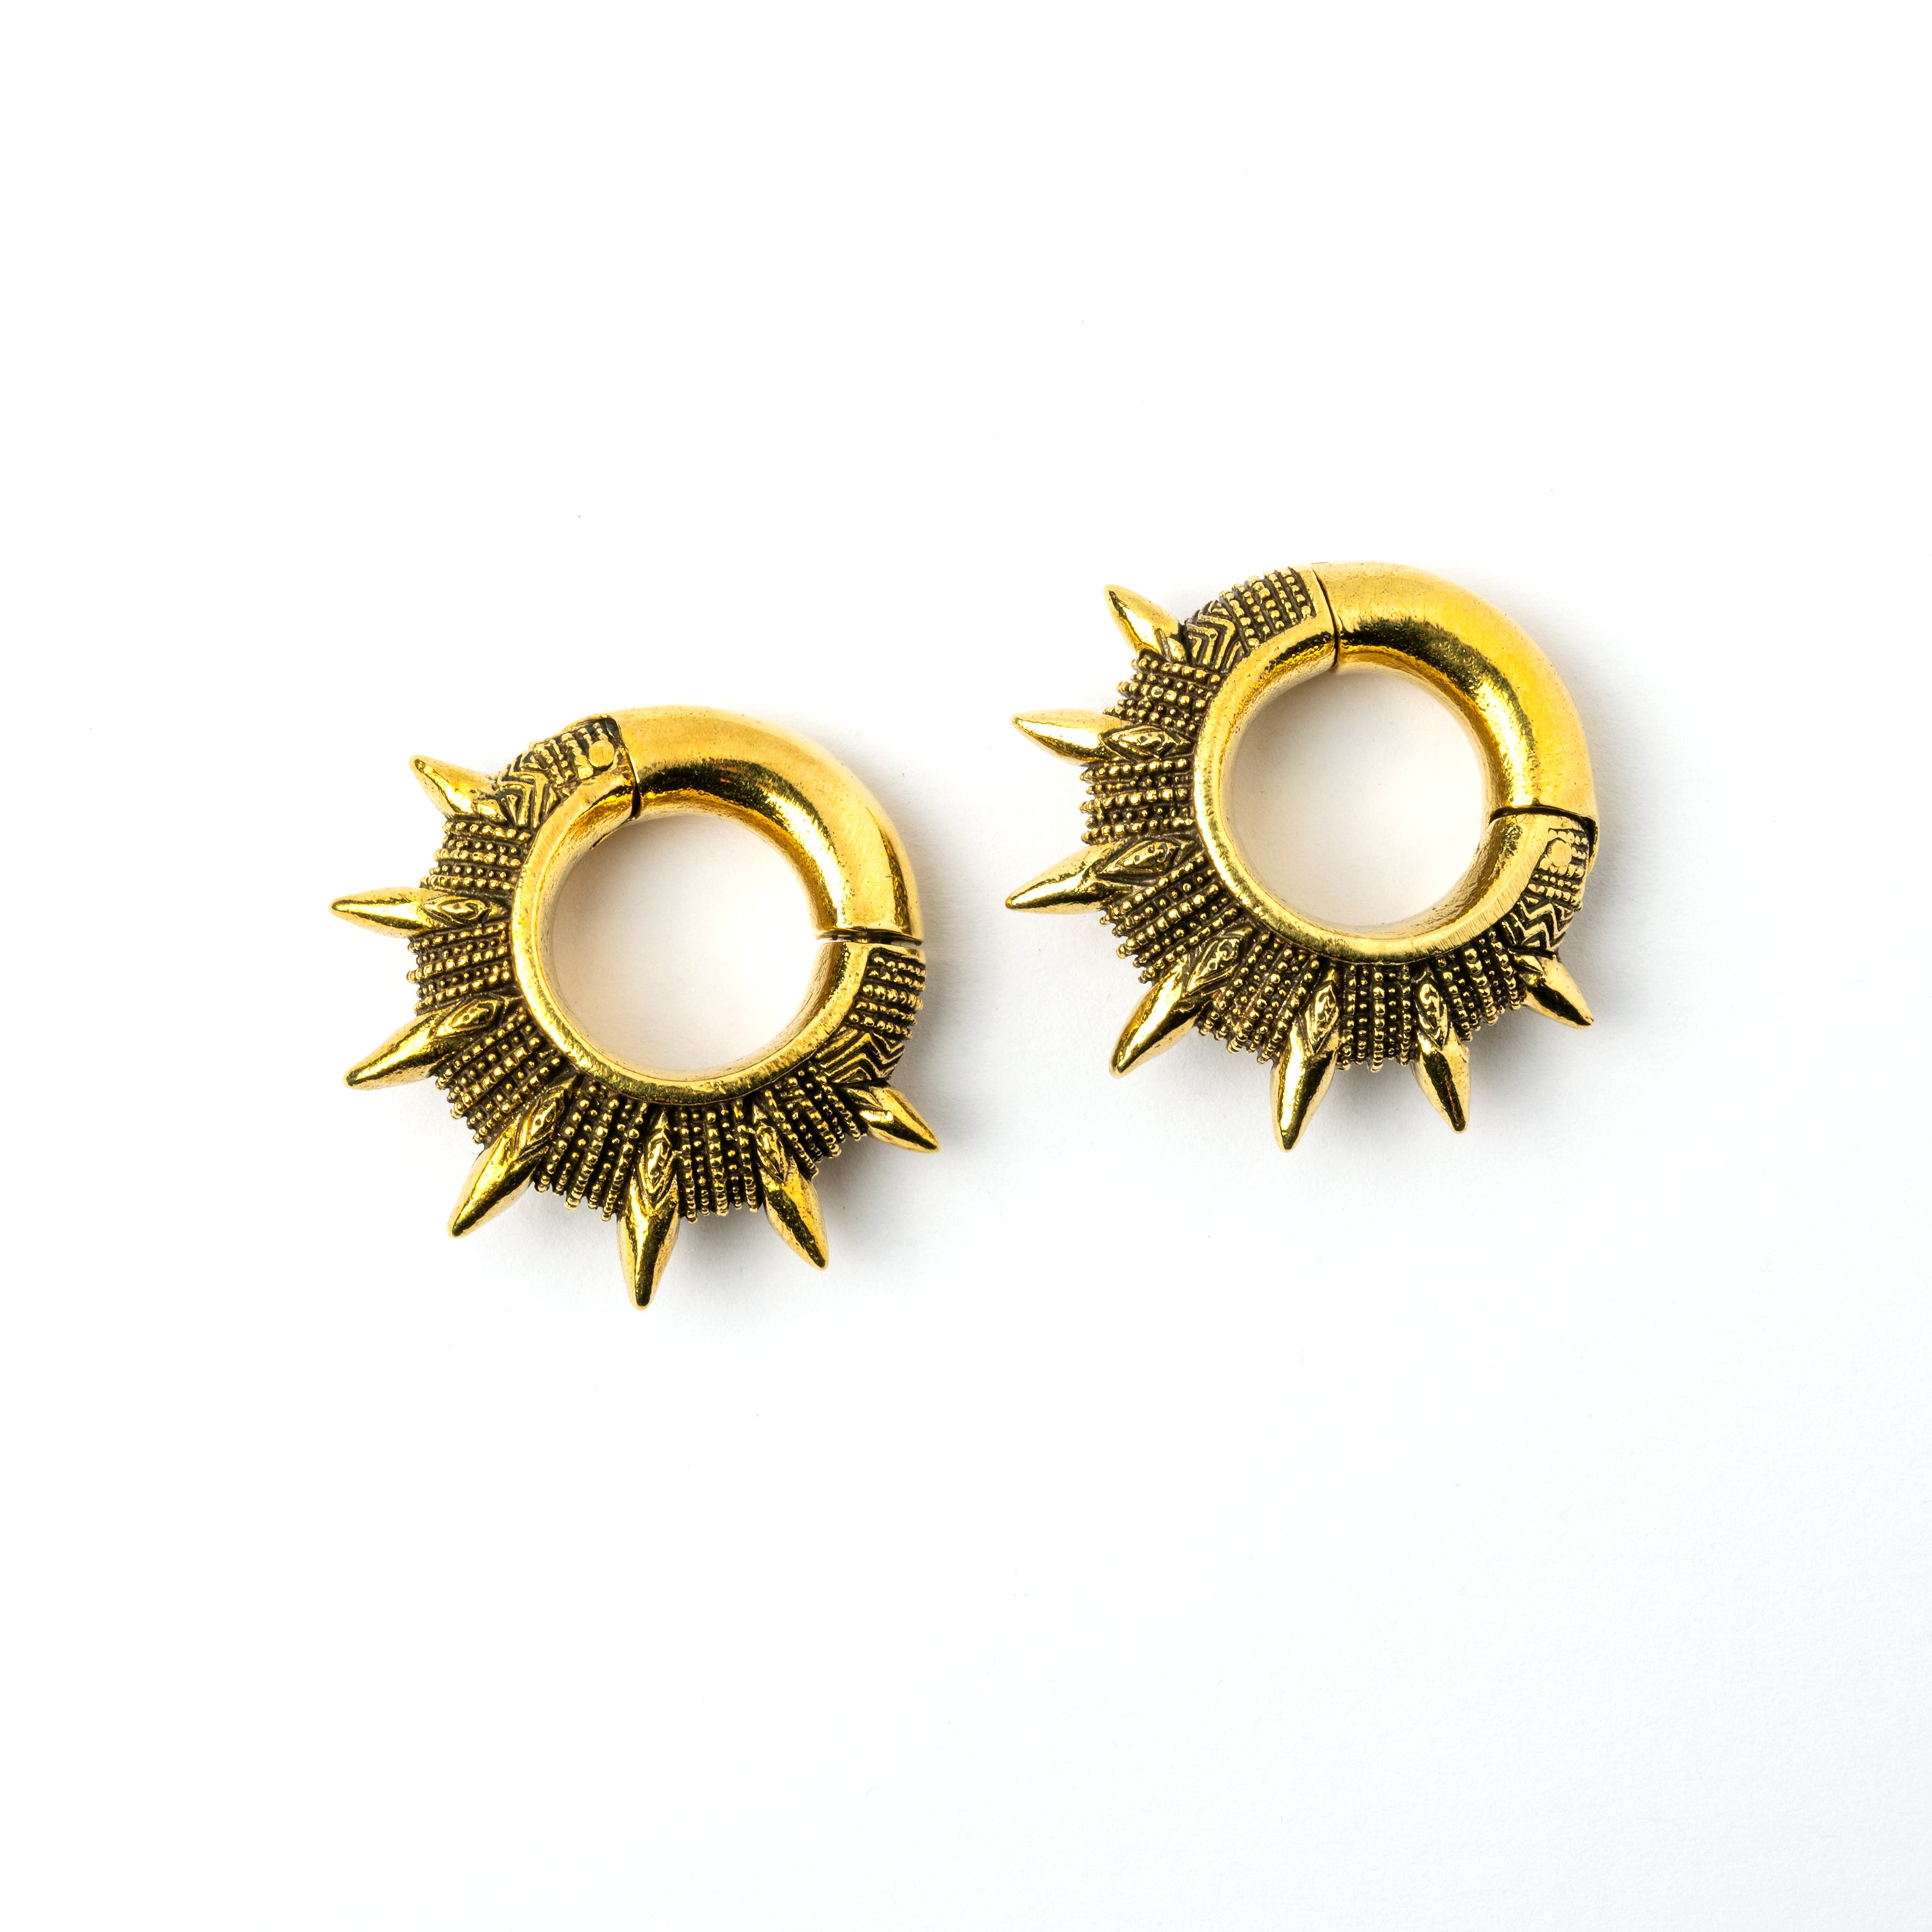 pair of golden spiky ear weights hoops right side view